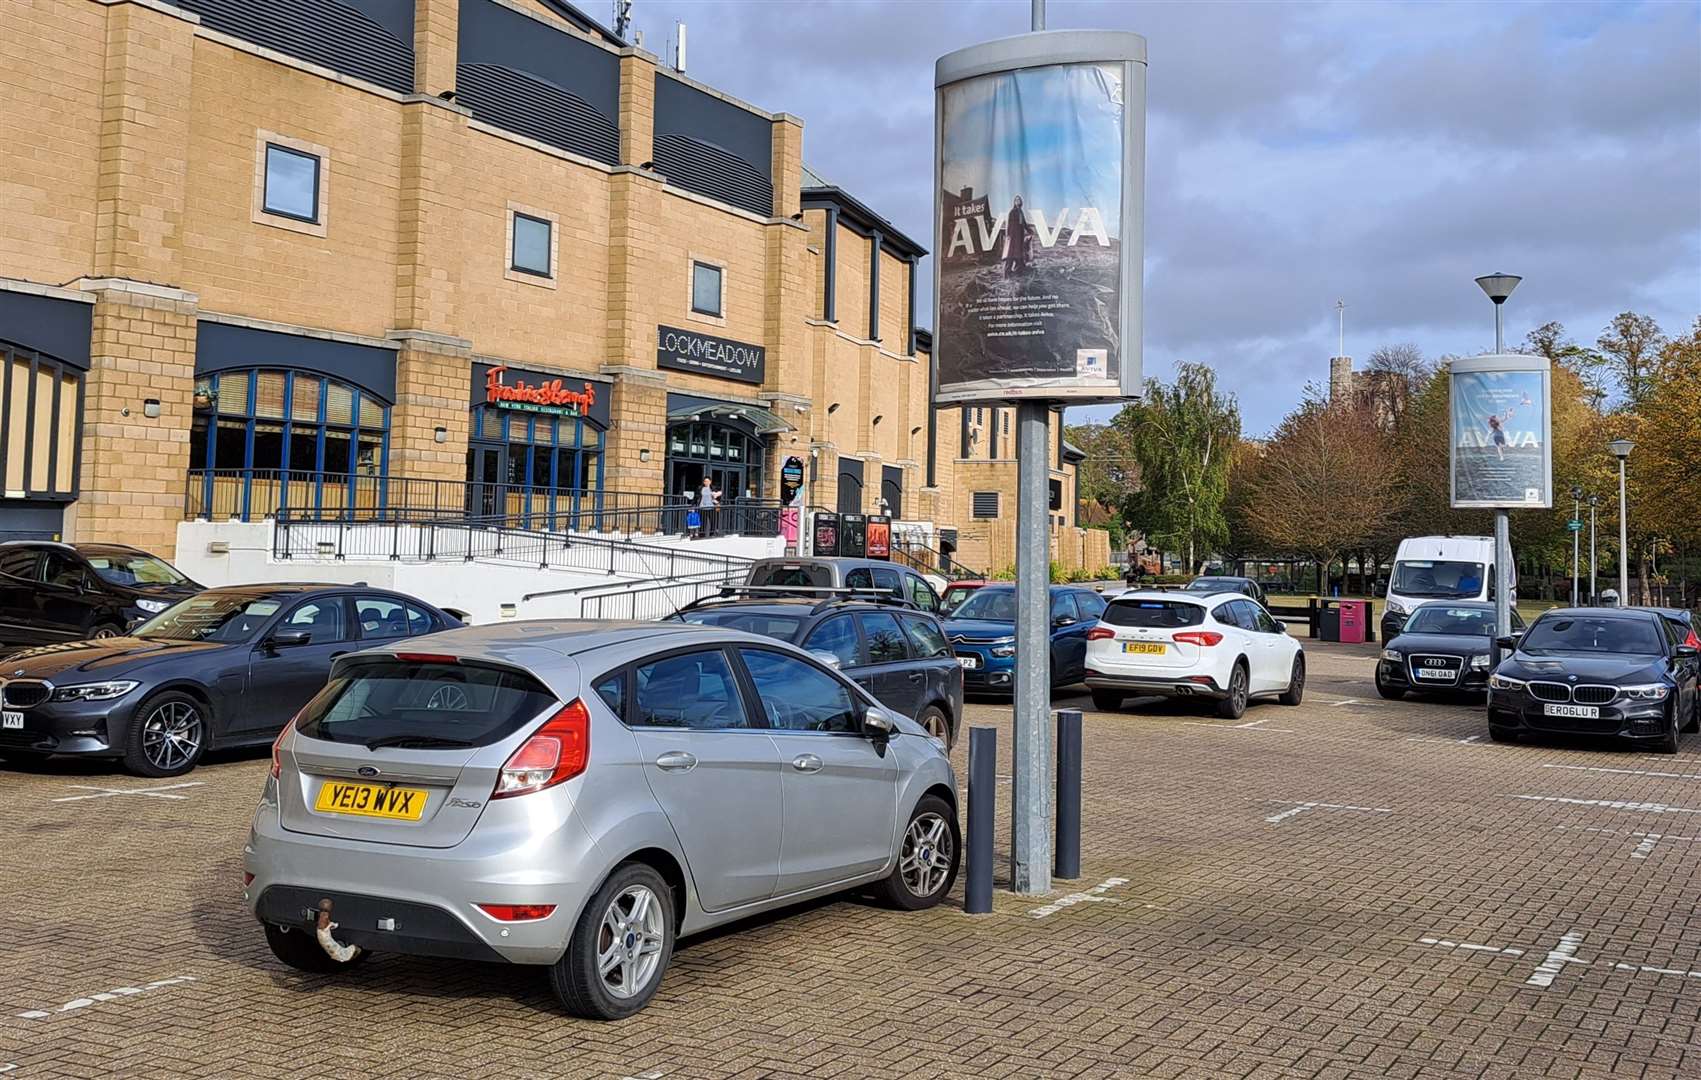 The Lockmeadow car park in Maidstone: a charge of £7 for a full day. Picture: Sam Lennon KMG